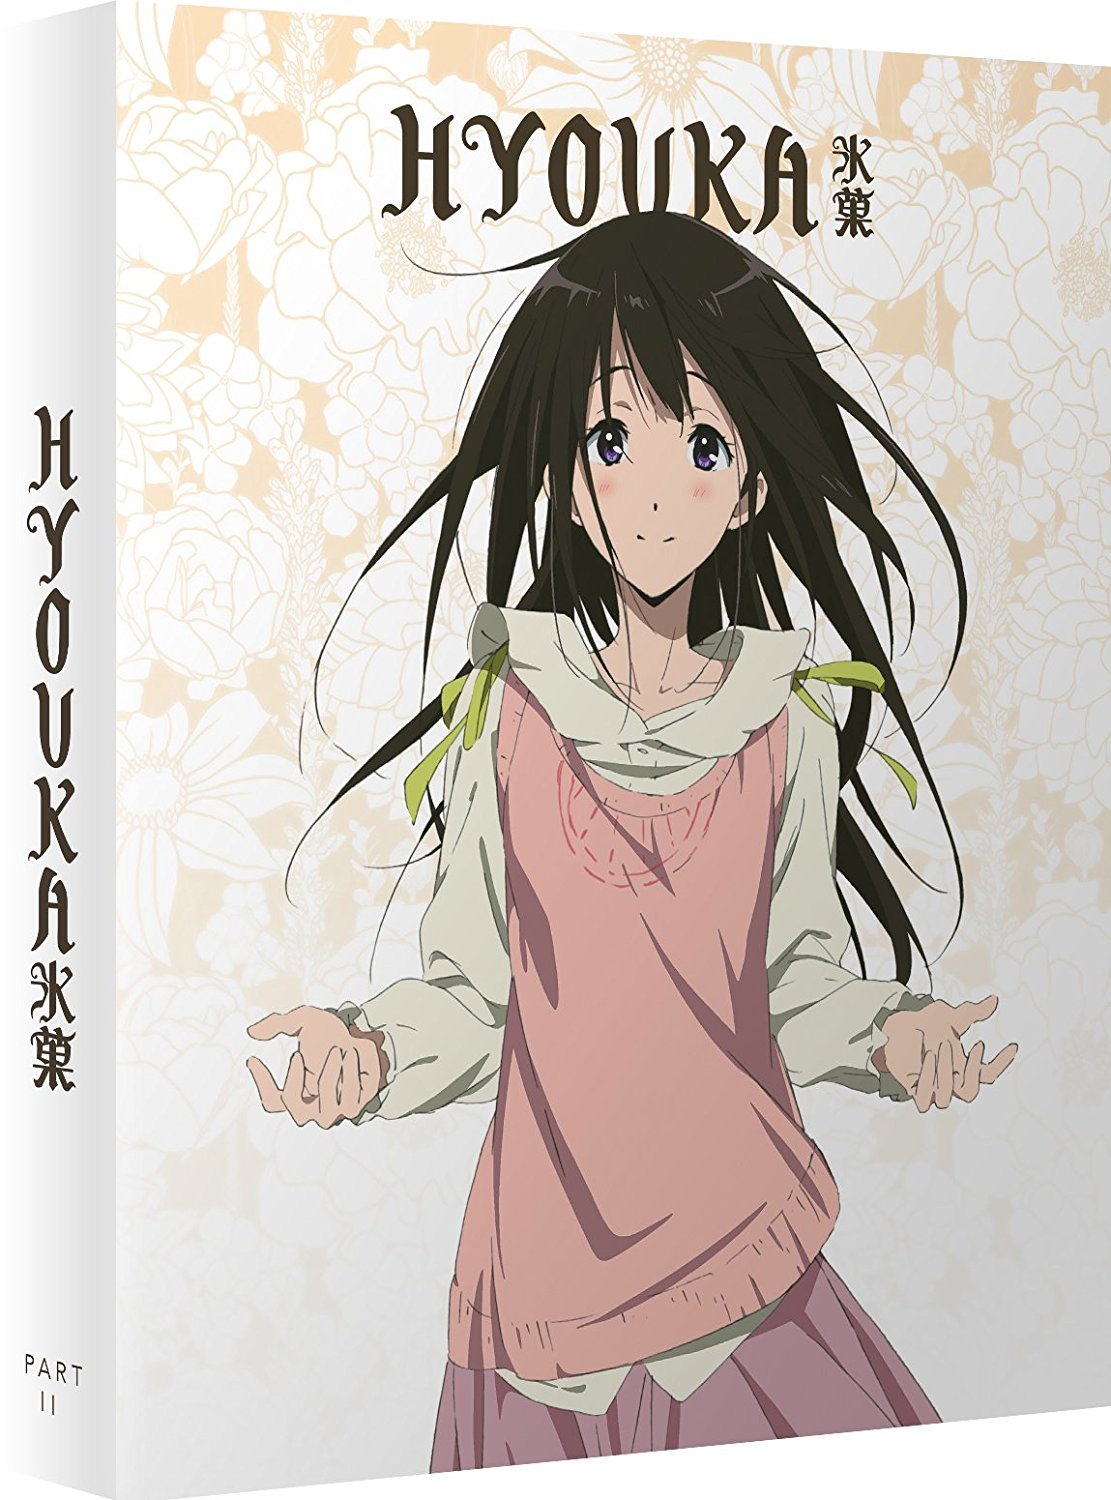 Hyouka: What Should Be Had Anime Reviews | Anime-Planet